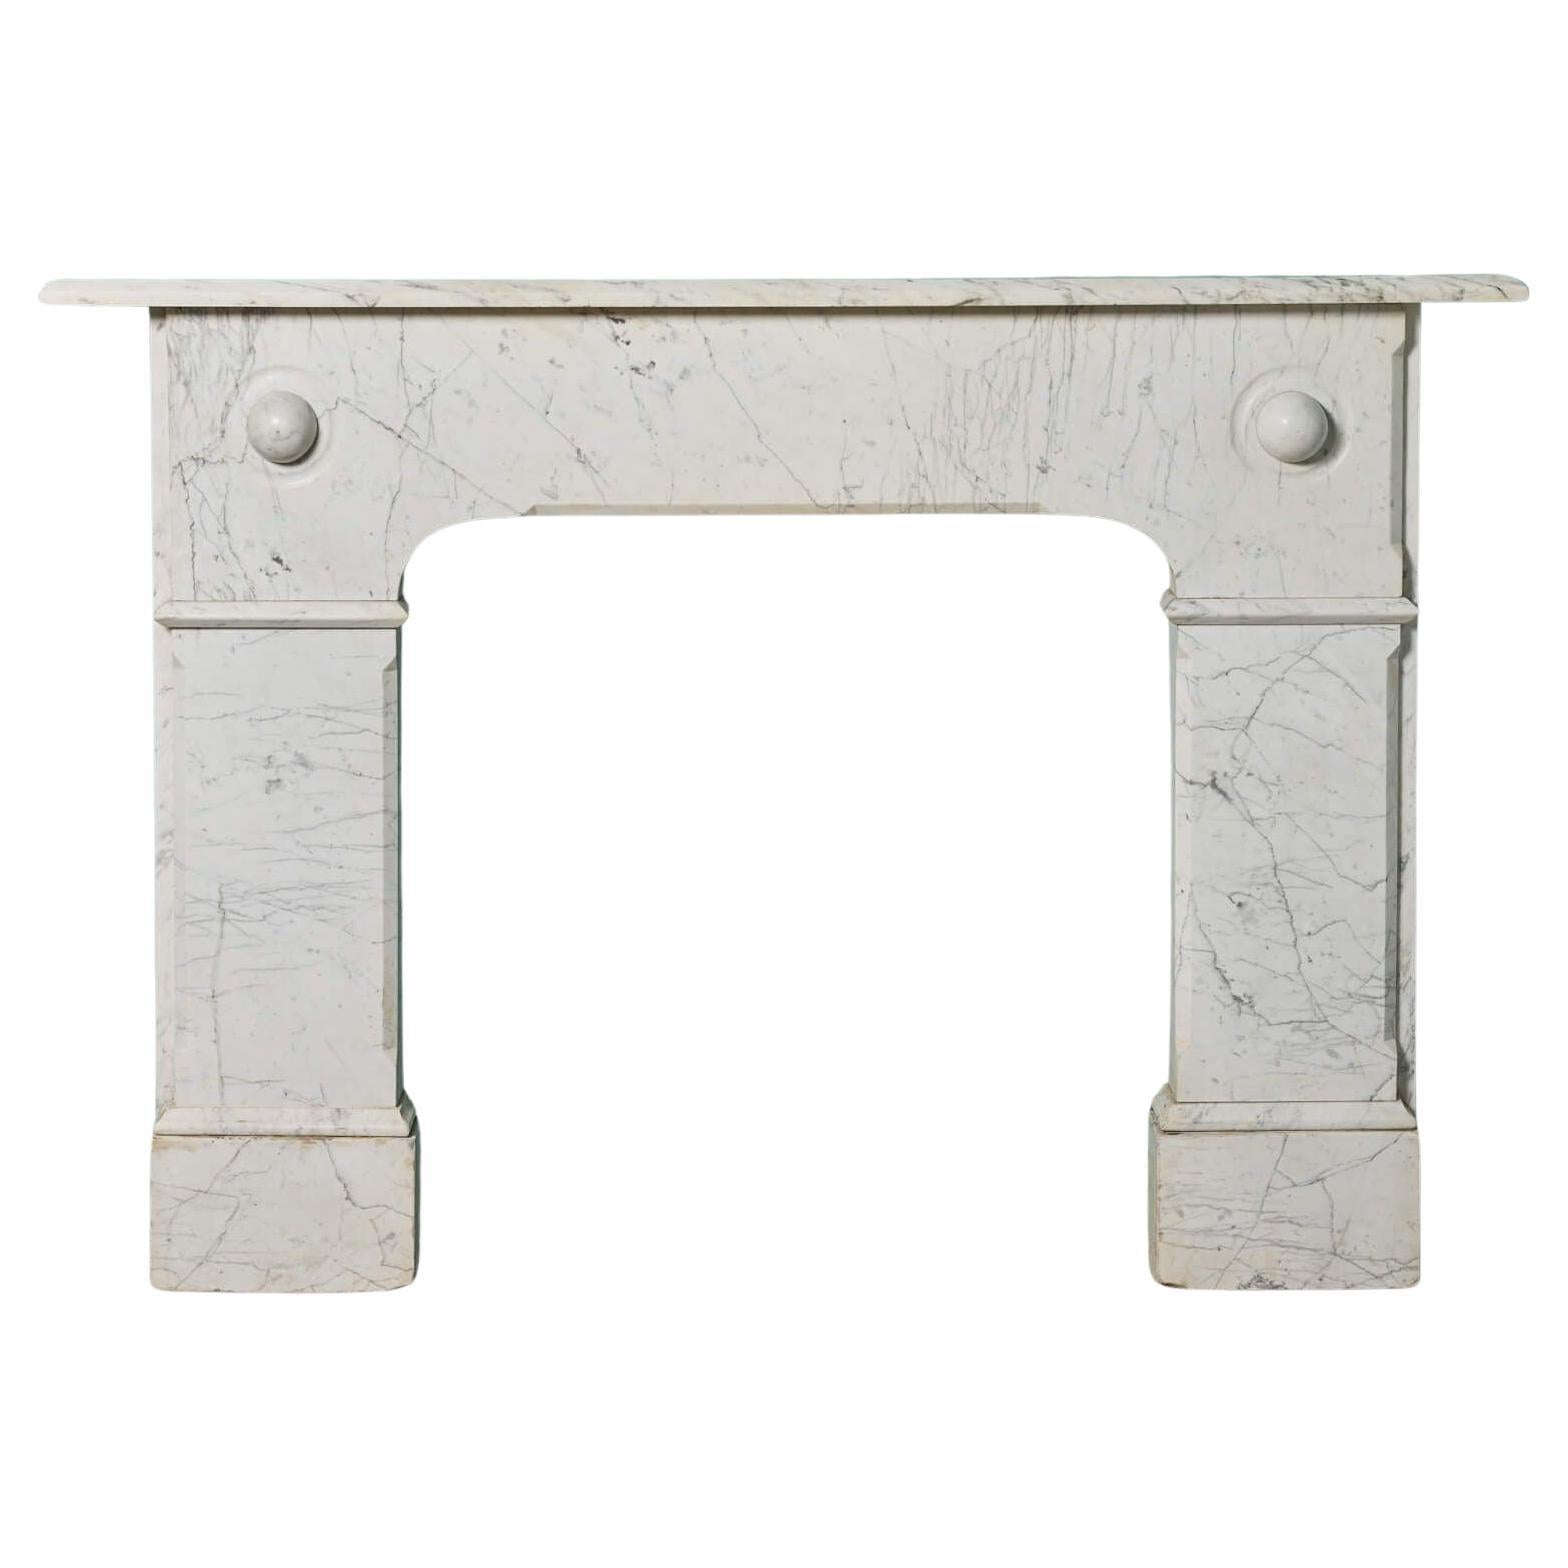 Antique Victorian Carrara Marble Fireplace Mantel For Sale